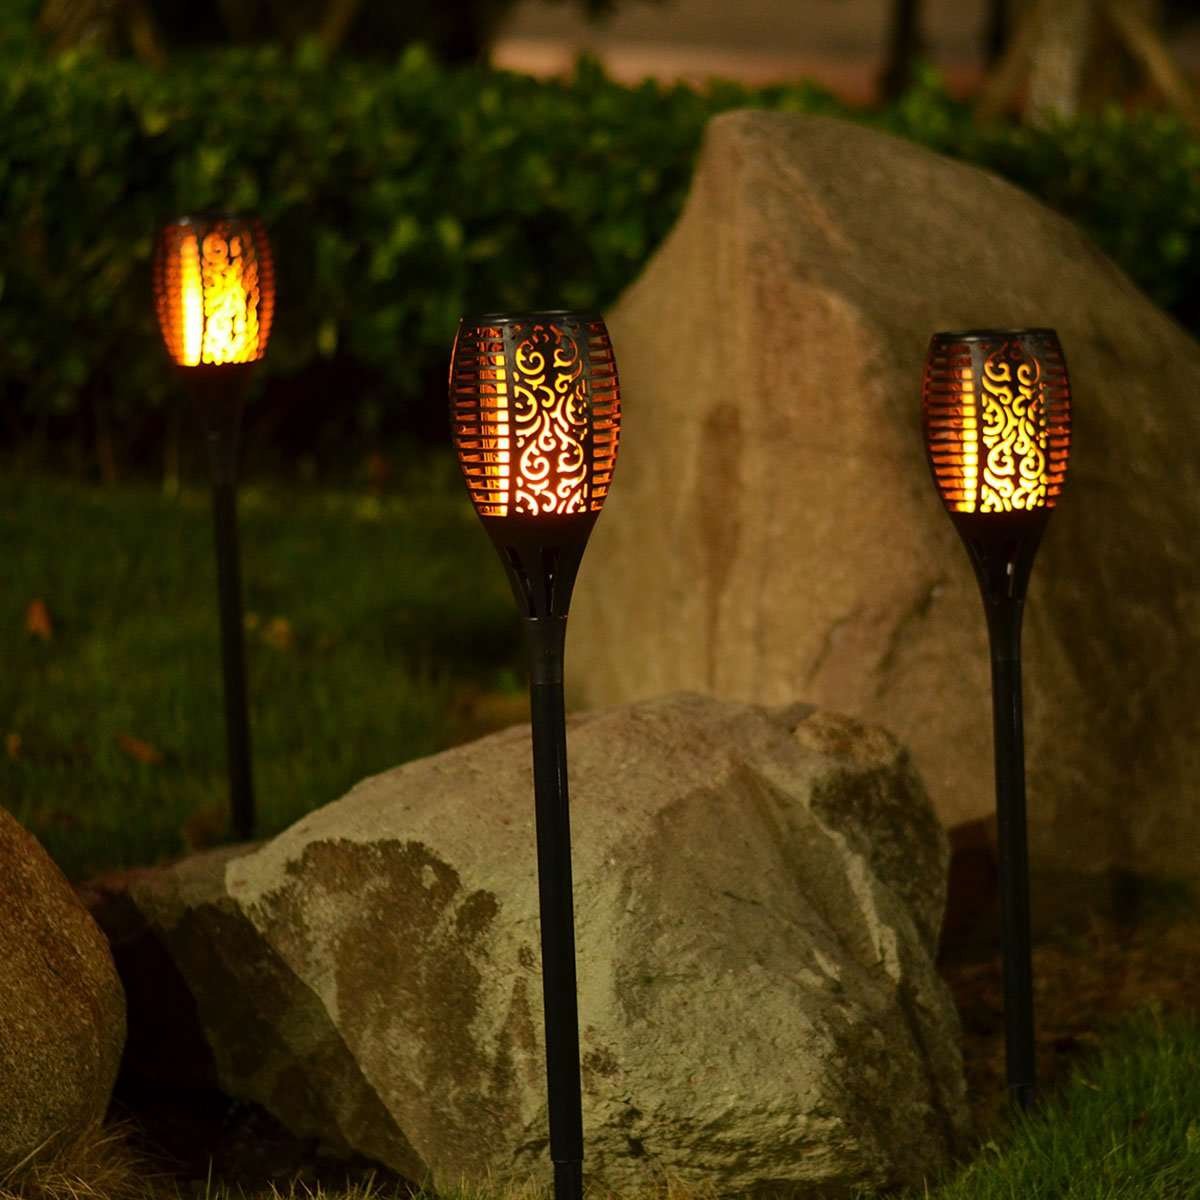 Details about   1-6 Pack 96 LED Waterproof Solar Tiki Torch Light Dancing Flickering Flame Lamp 